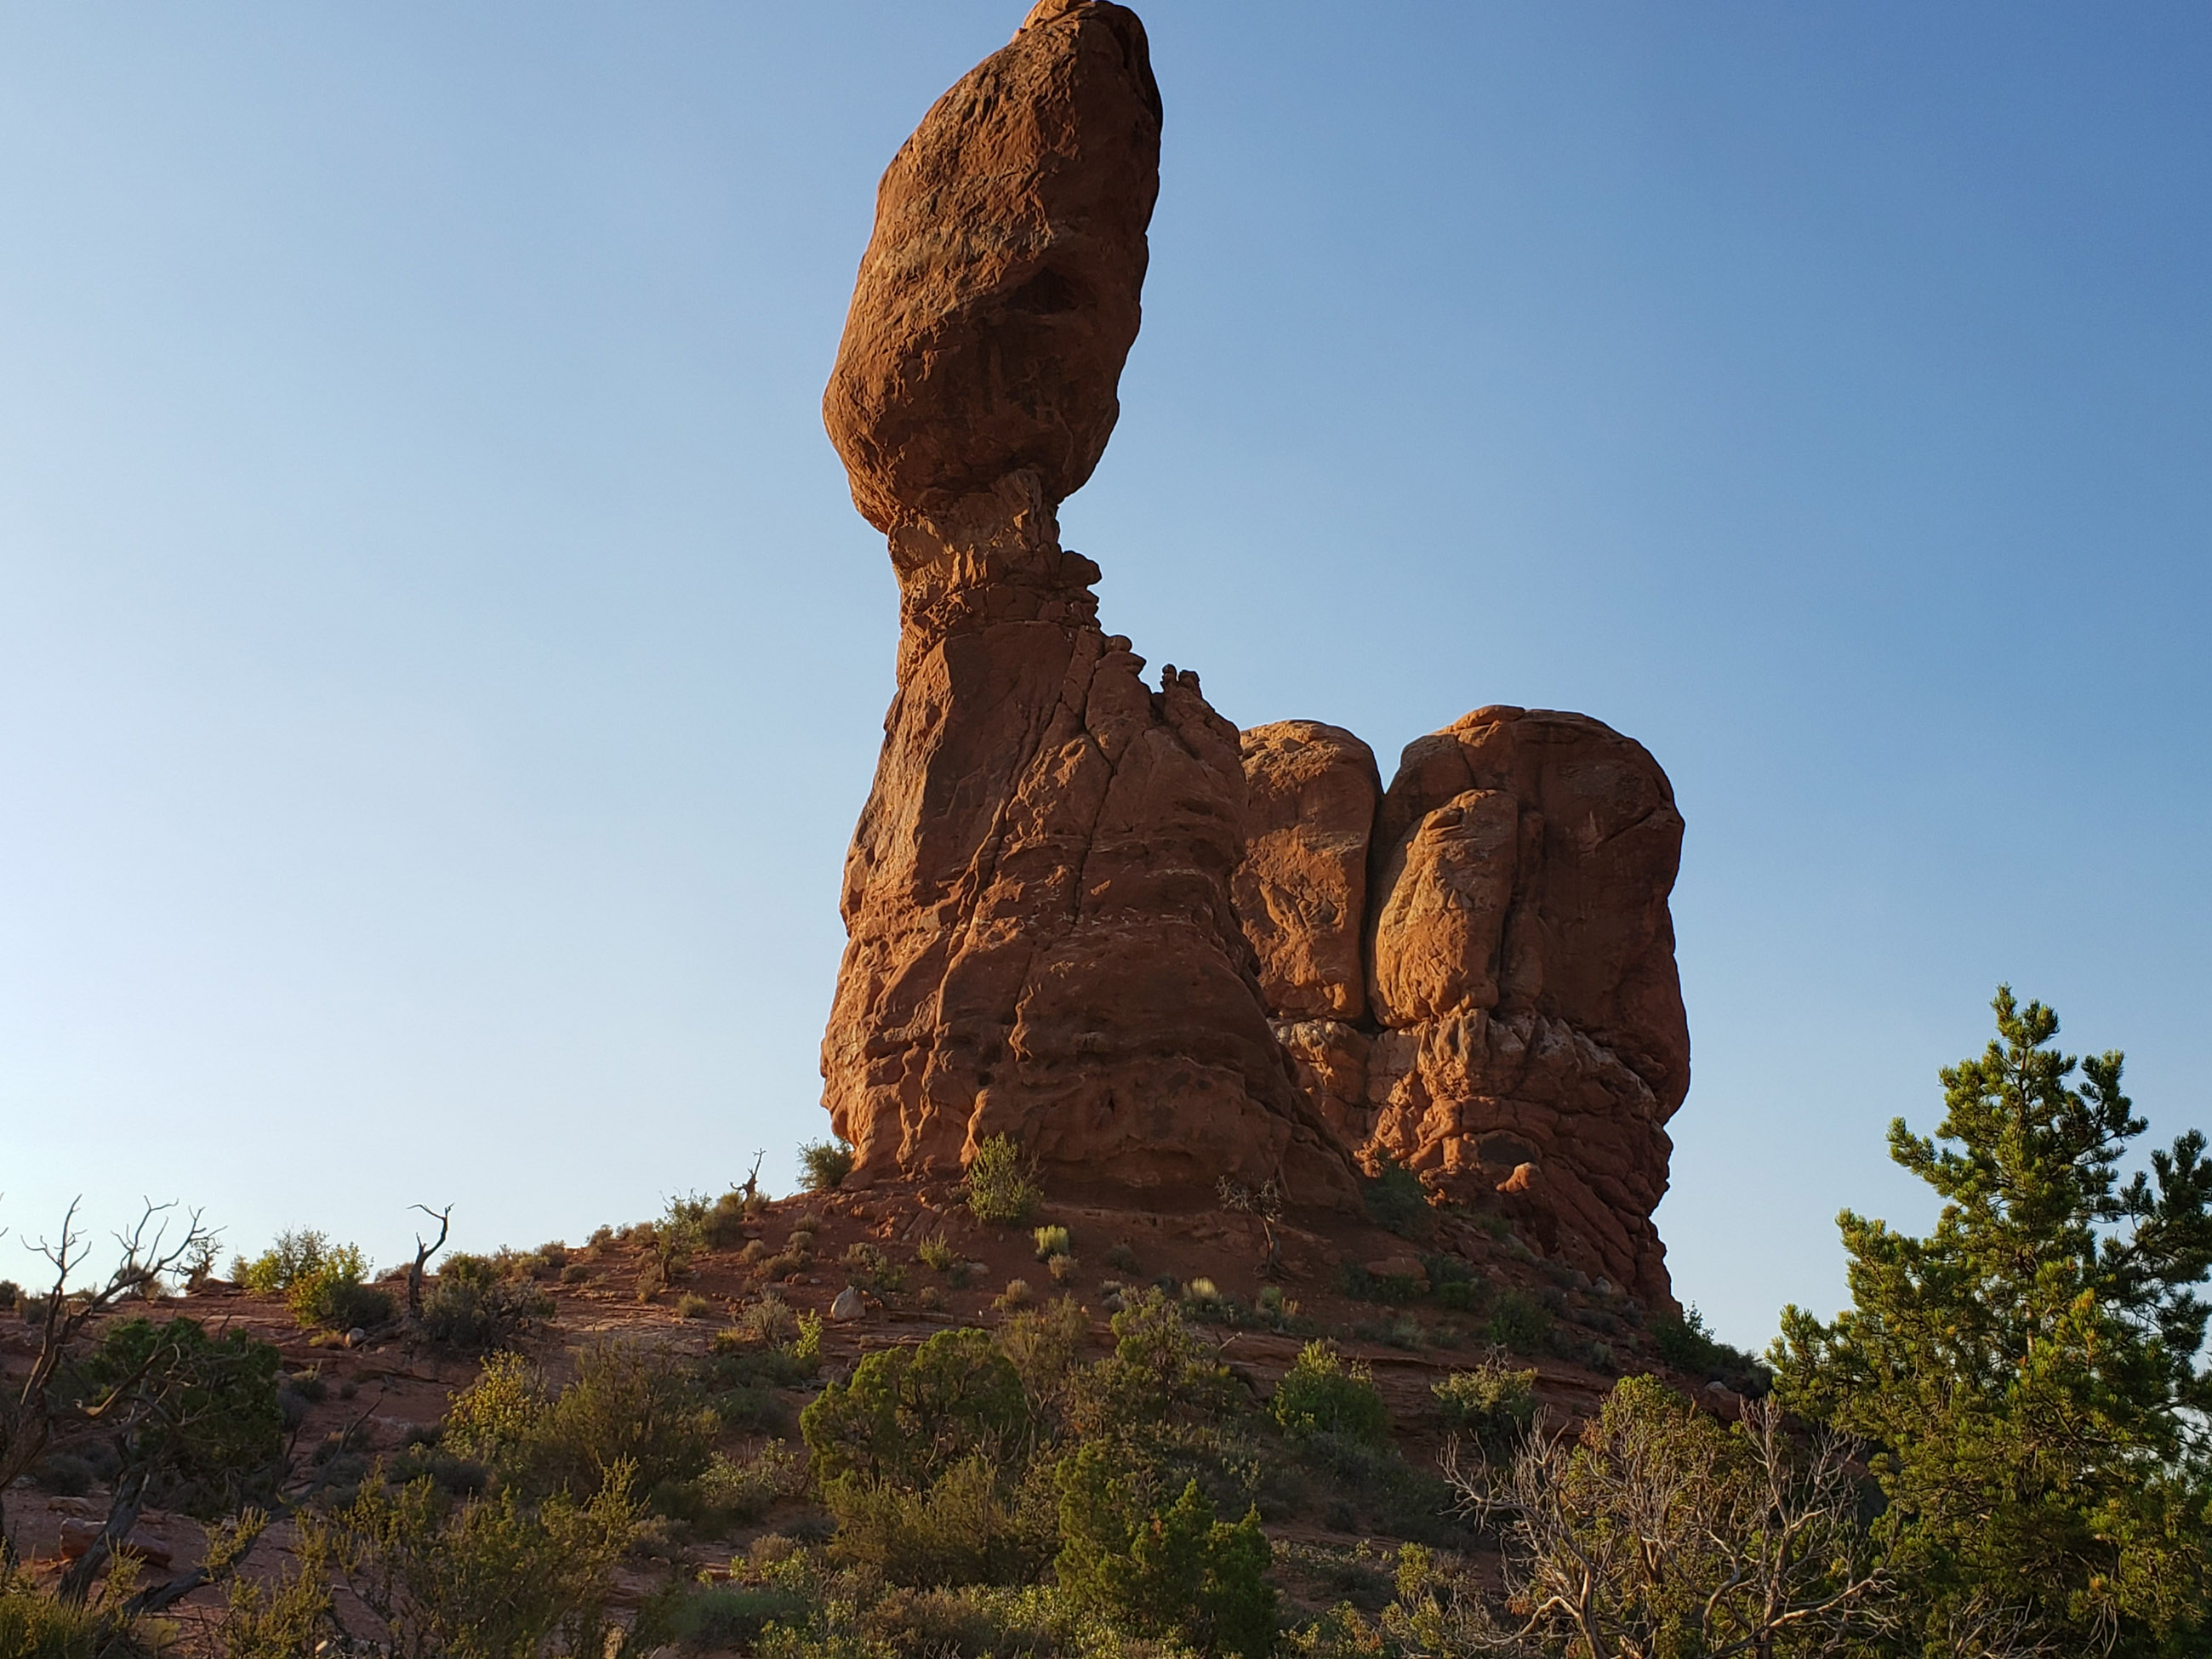 Eroded rock formation known as Balance Rock in Arches National Park